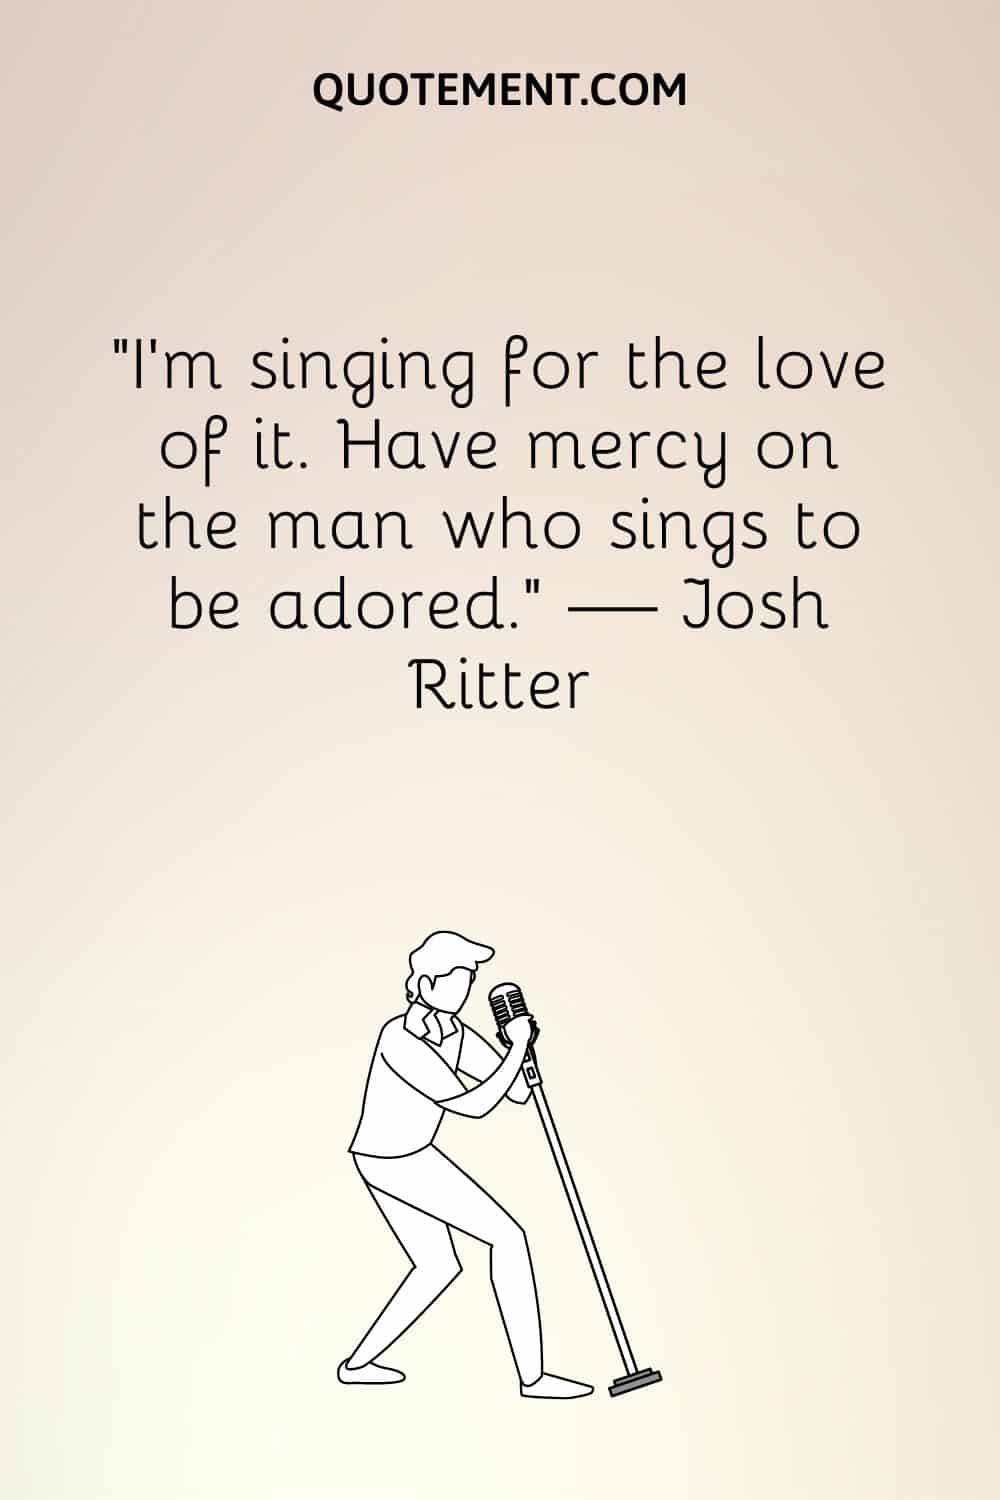 “I’m singing for the love of it. Have mercy on the man who sings to be adored.” — Josh Ritter
